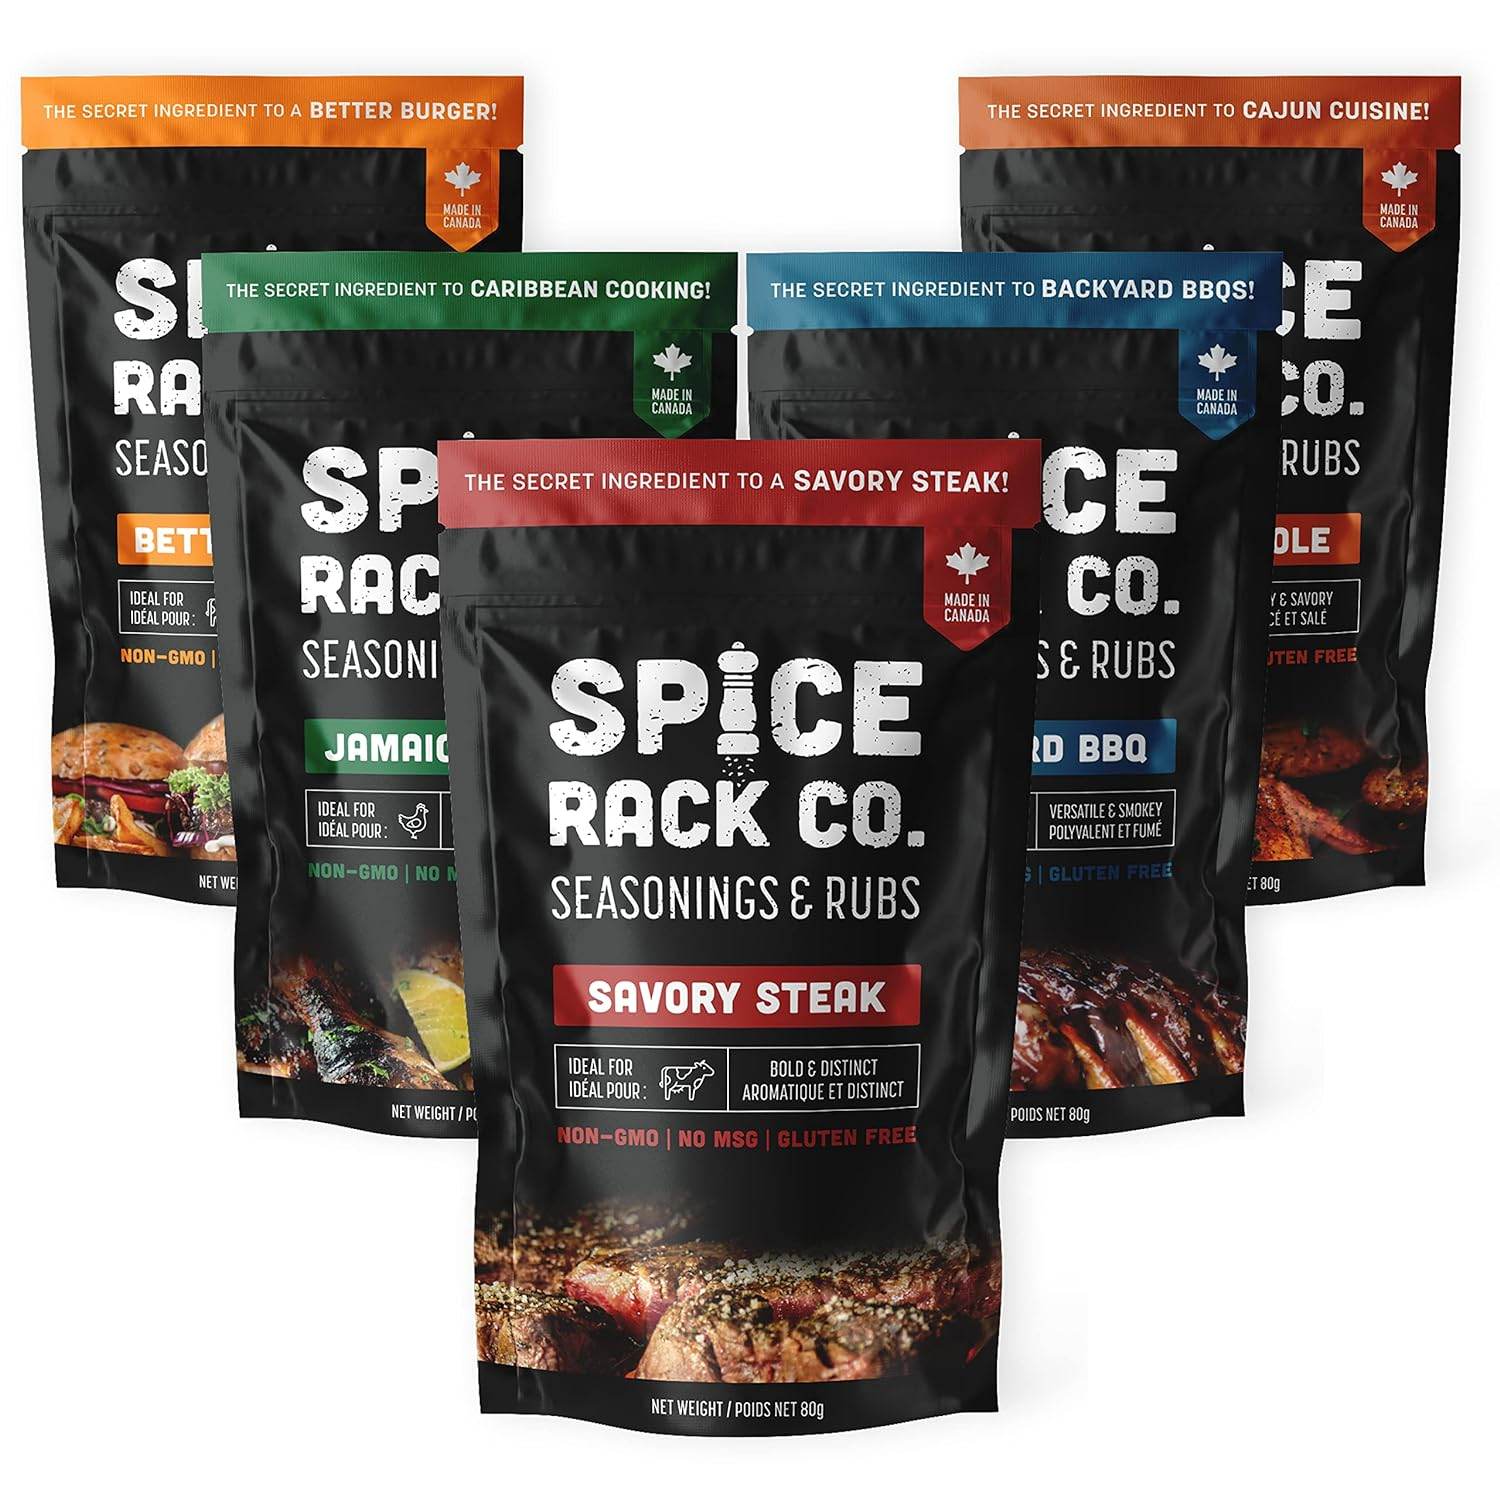 BBQ Spices And Rubs Gift Set - Spice Rack Co BBQ Rub Gift Sets, Grill Seasoning Gift Set Of 5 Flavors, Grilling Spices Gift Sets For Men & BBQ gifts for men, BBQ Seasonings And Rubs Gift Set of 5 - Barbecue Whizz...Watch My Smoke!